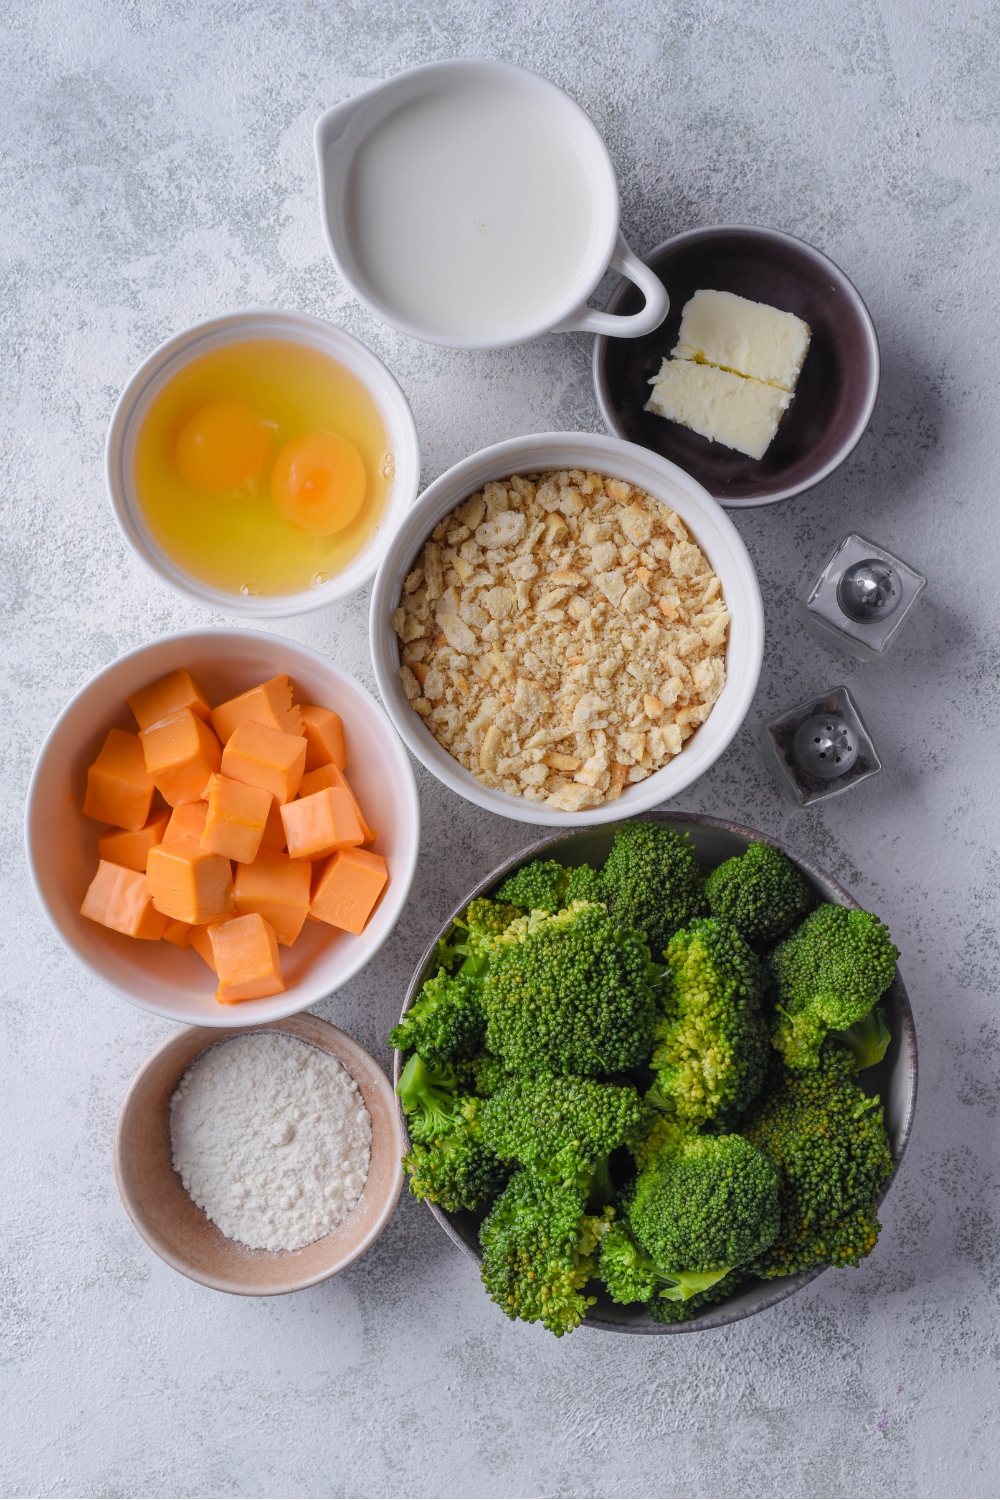 An assortment of ingredients including bowls of raw eggs, cubed cheese, cracker crumbs, milk, butter, broccoli, and flour.